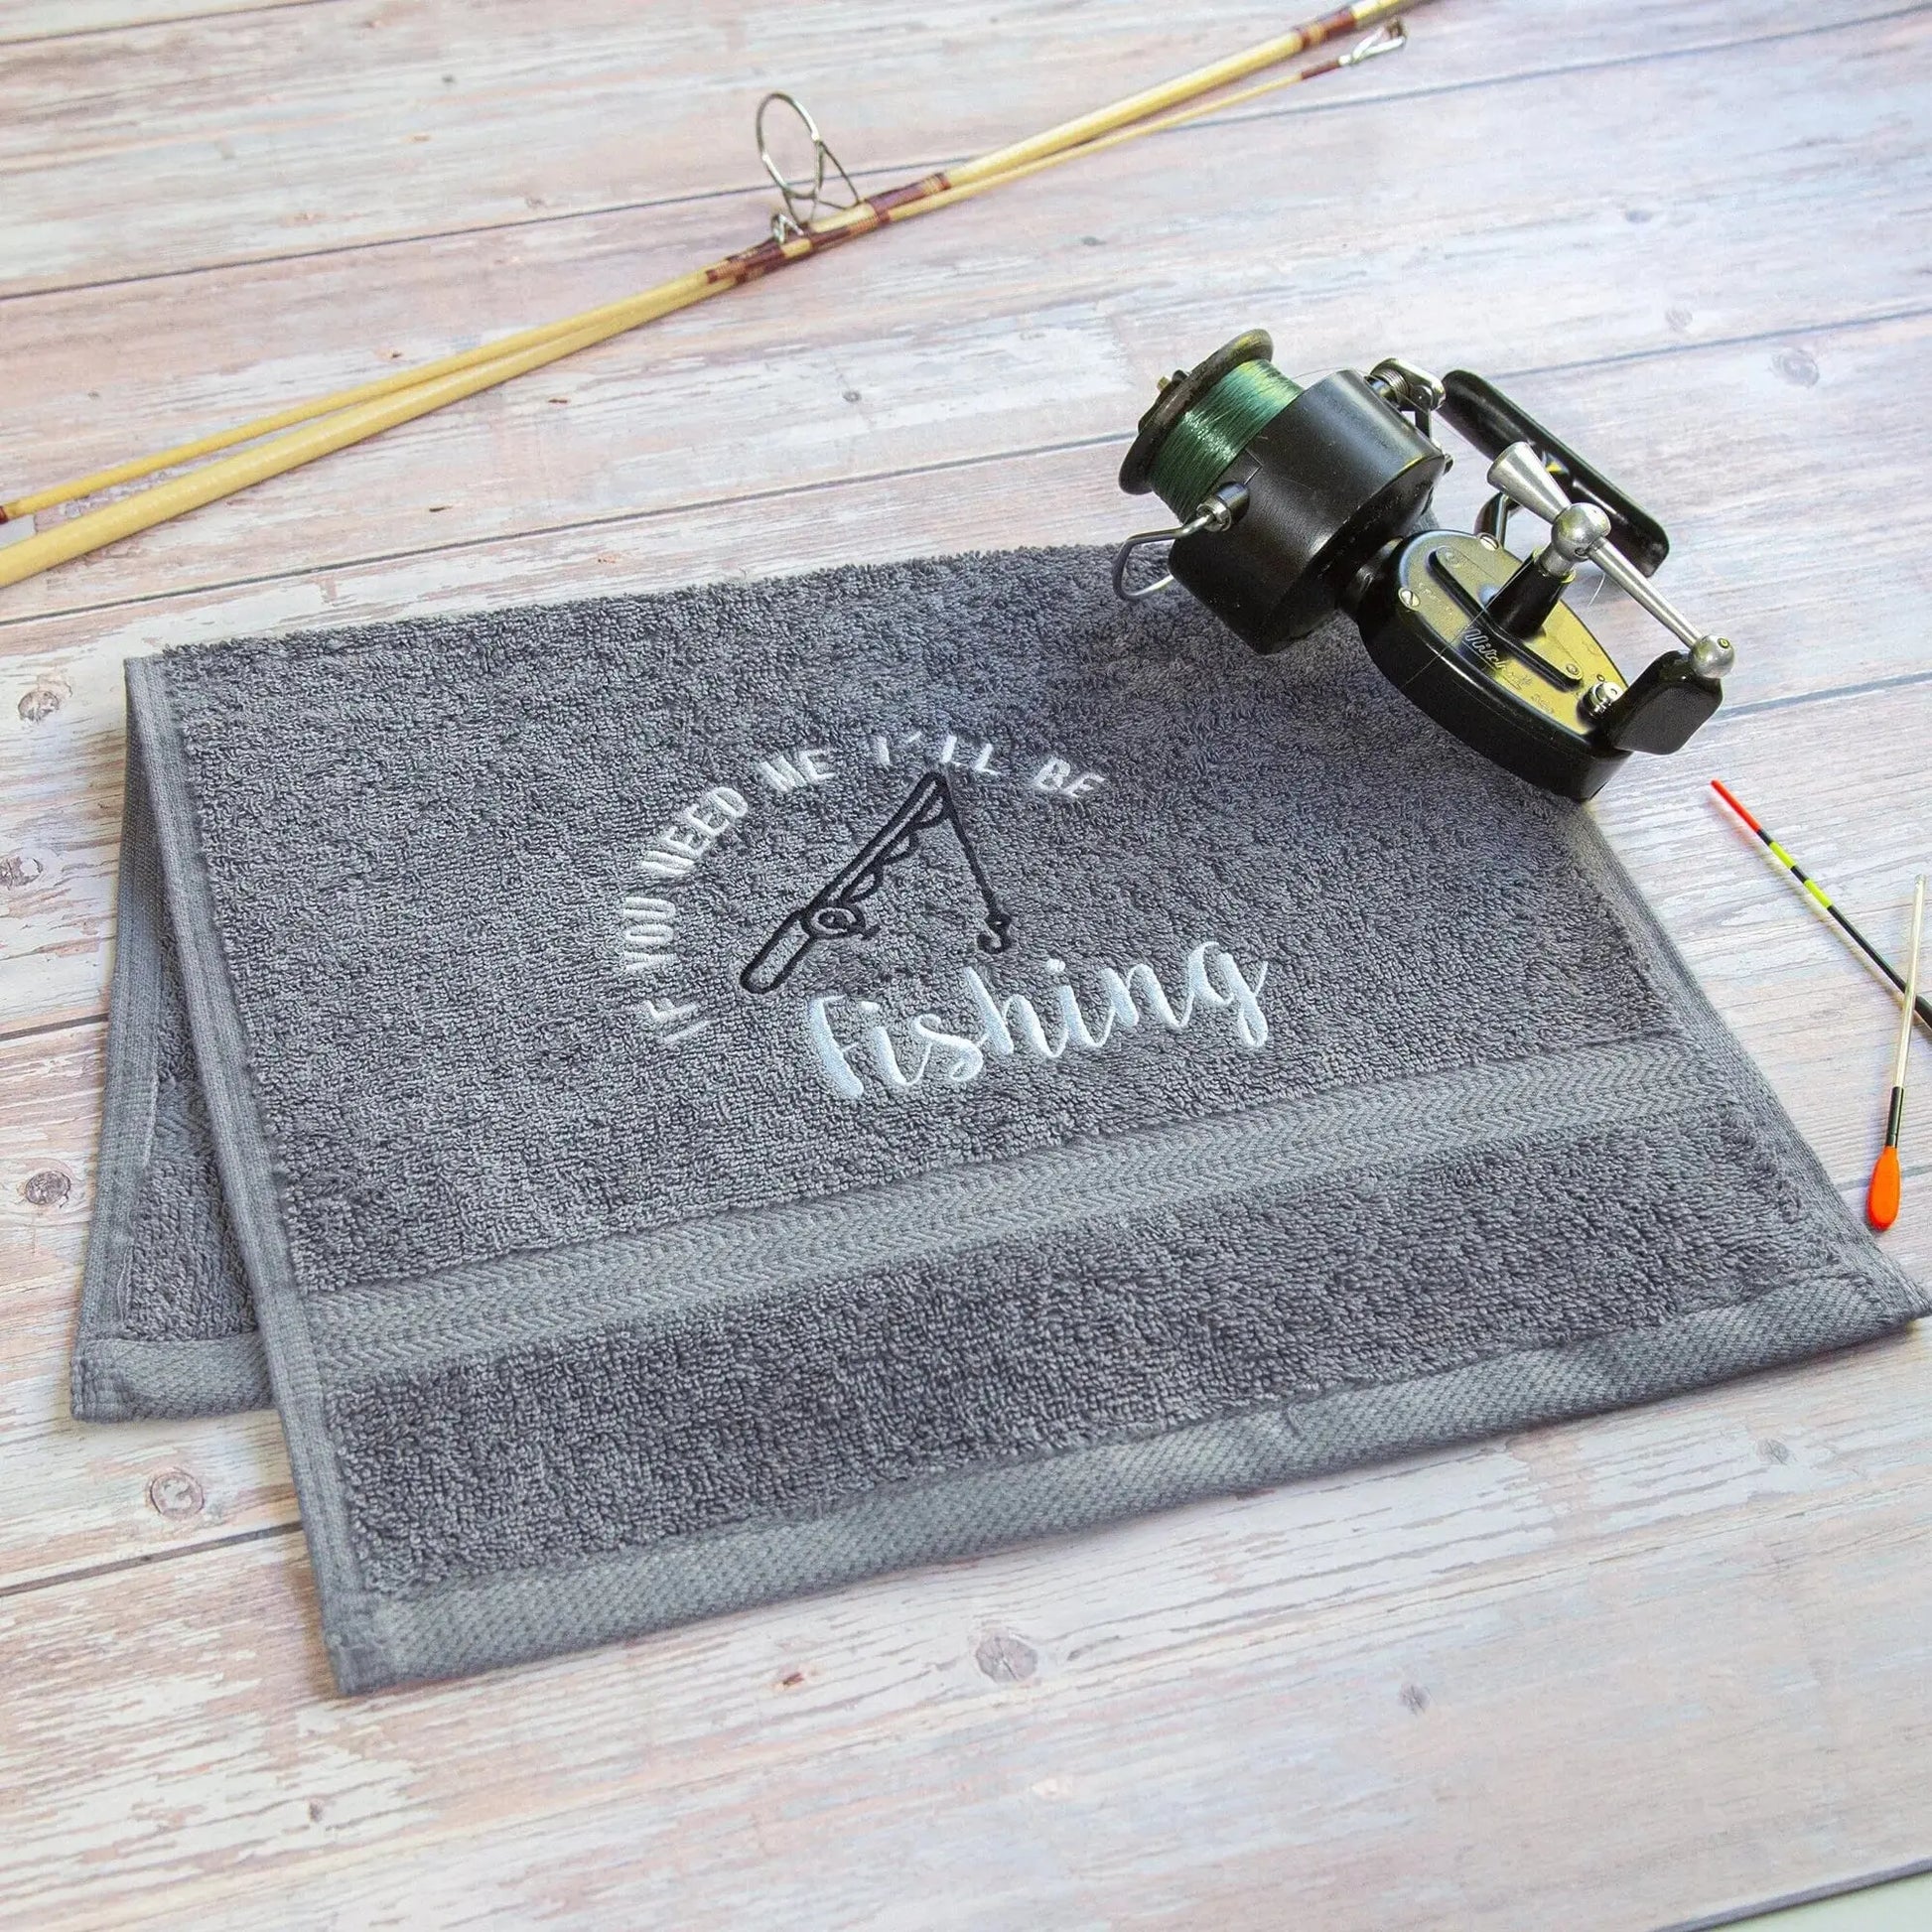 slate grey fishing towel for clean hands